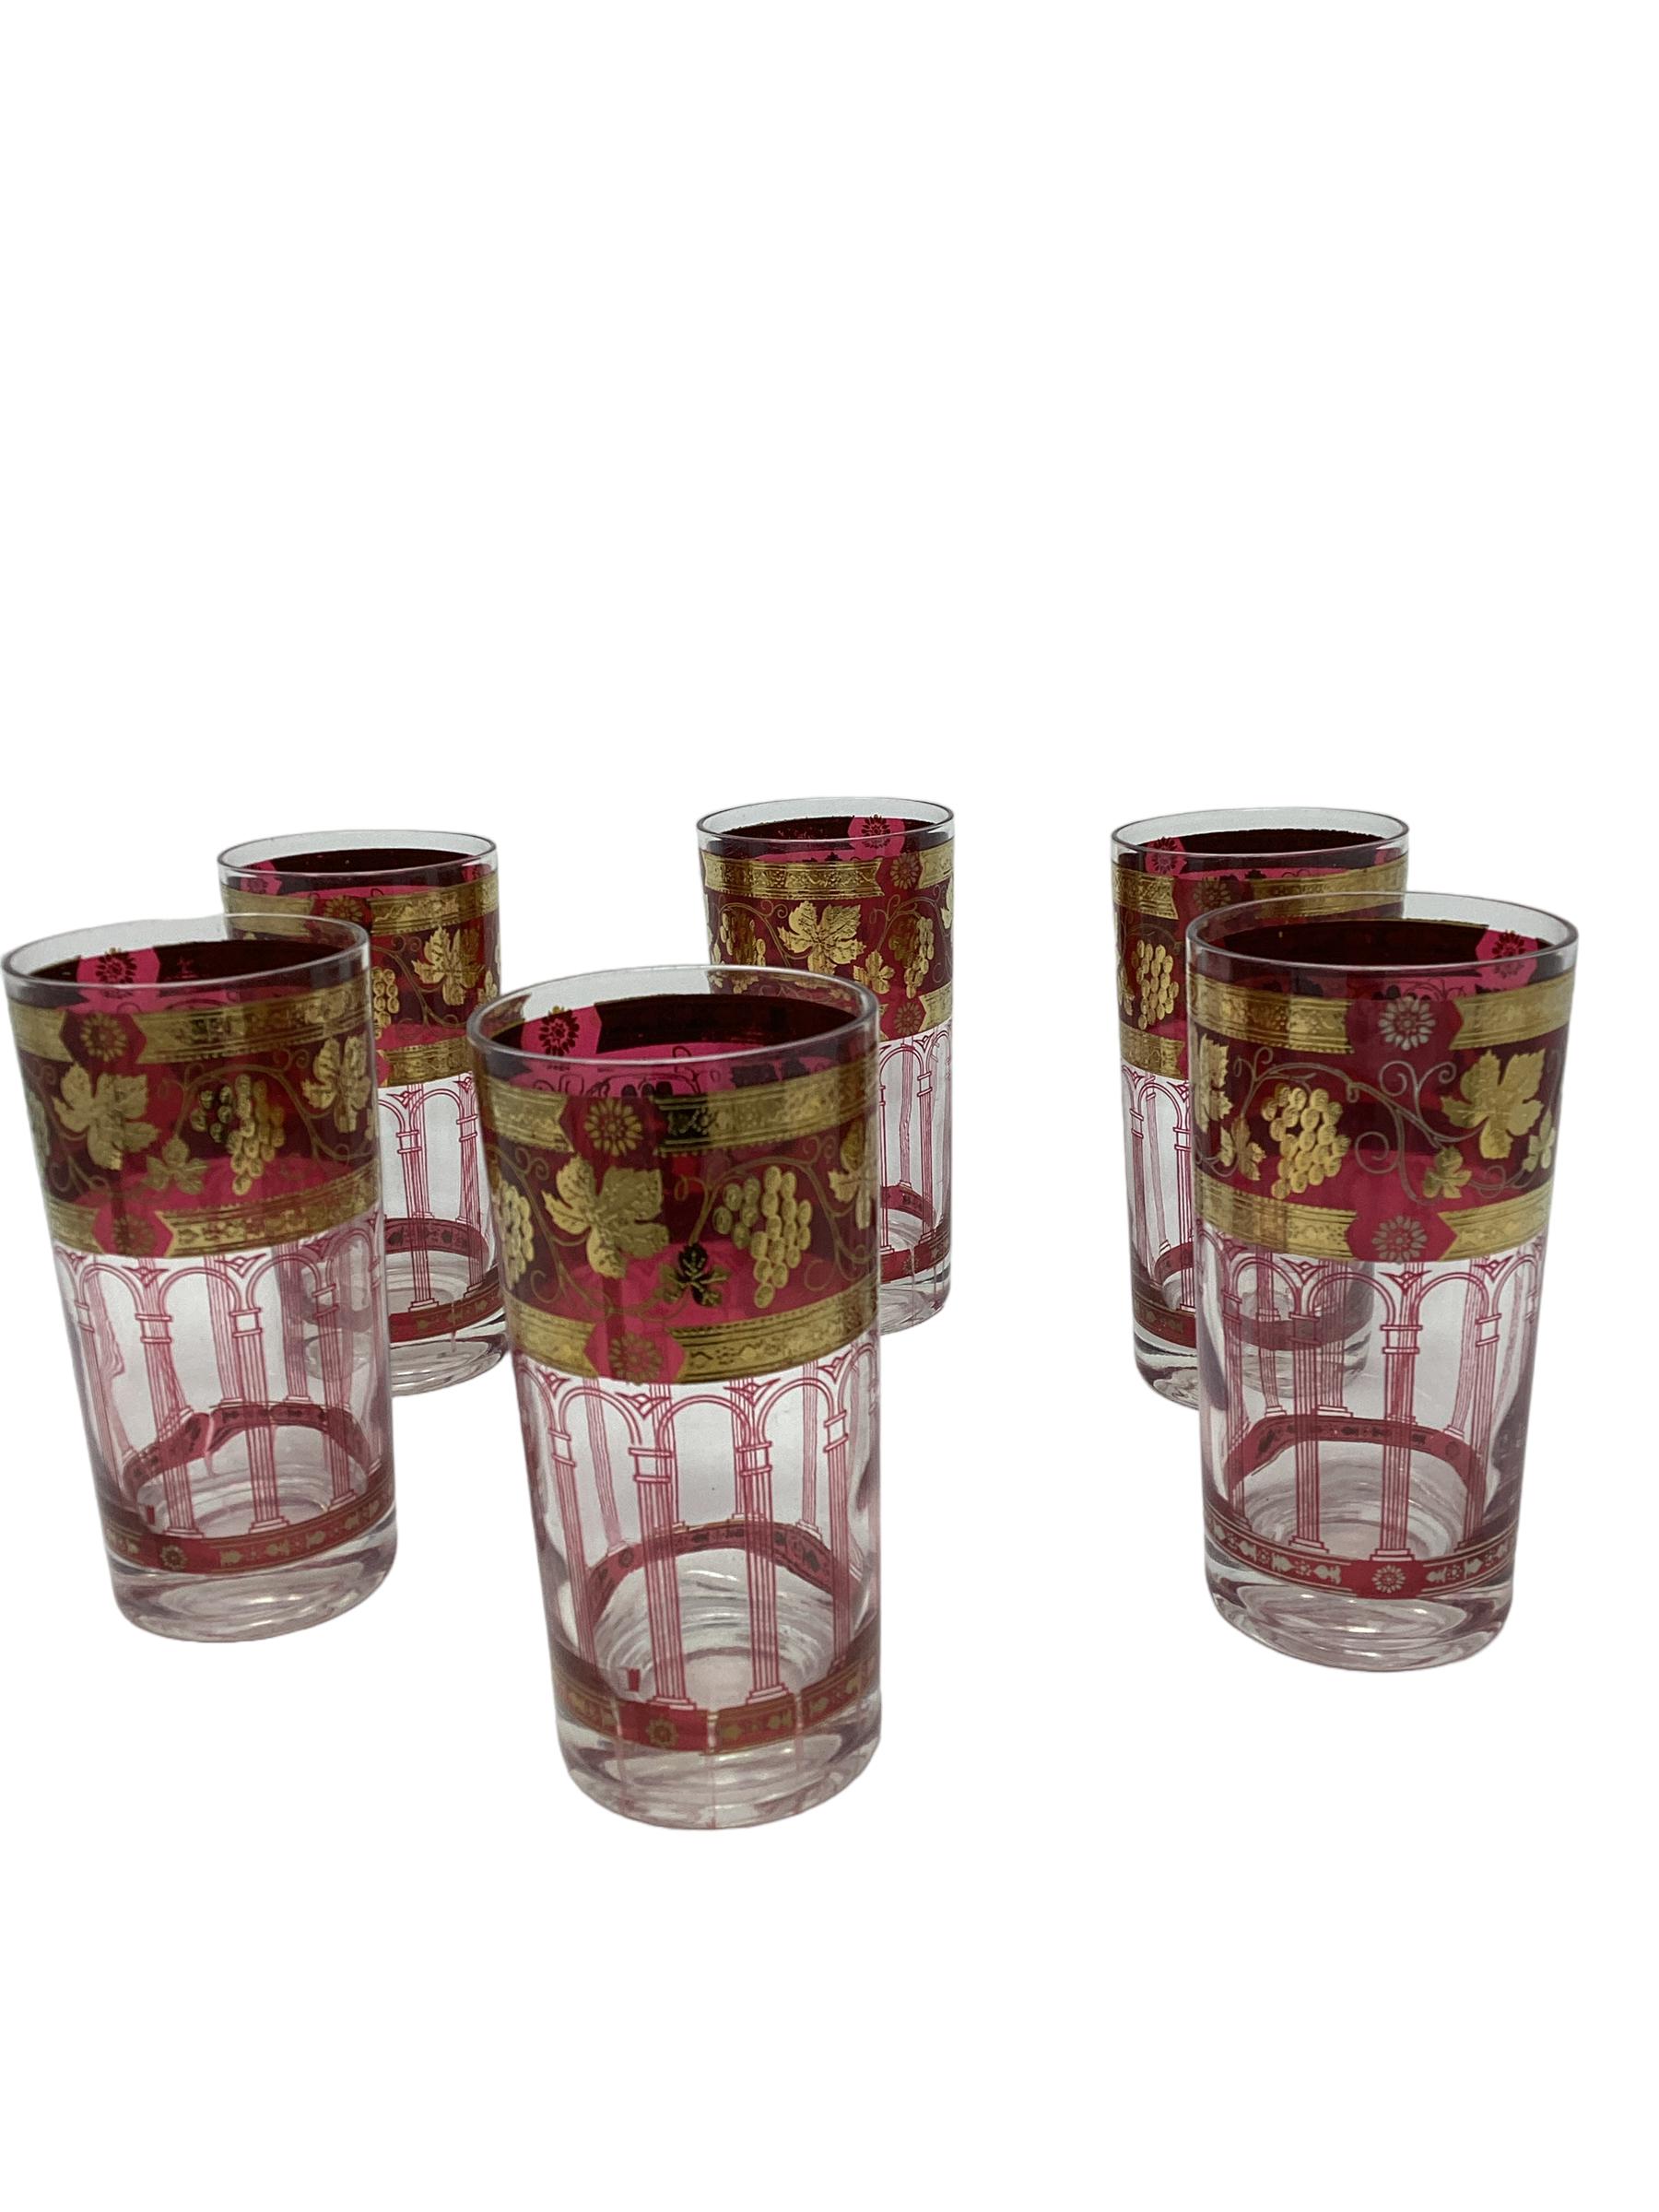 Set of 6 Cera Cranberry Highball Glasses with Grapes and Arched Columns  In Good Condition For Sale In Chapel Hill, NC